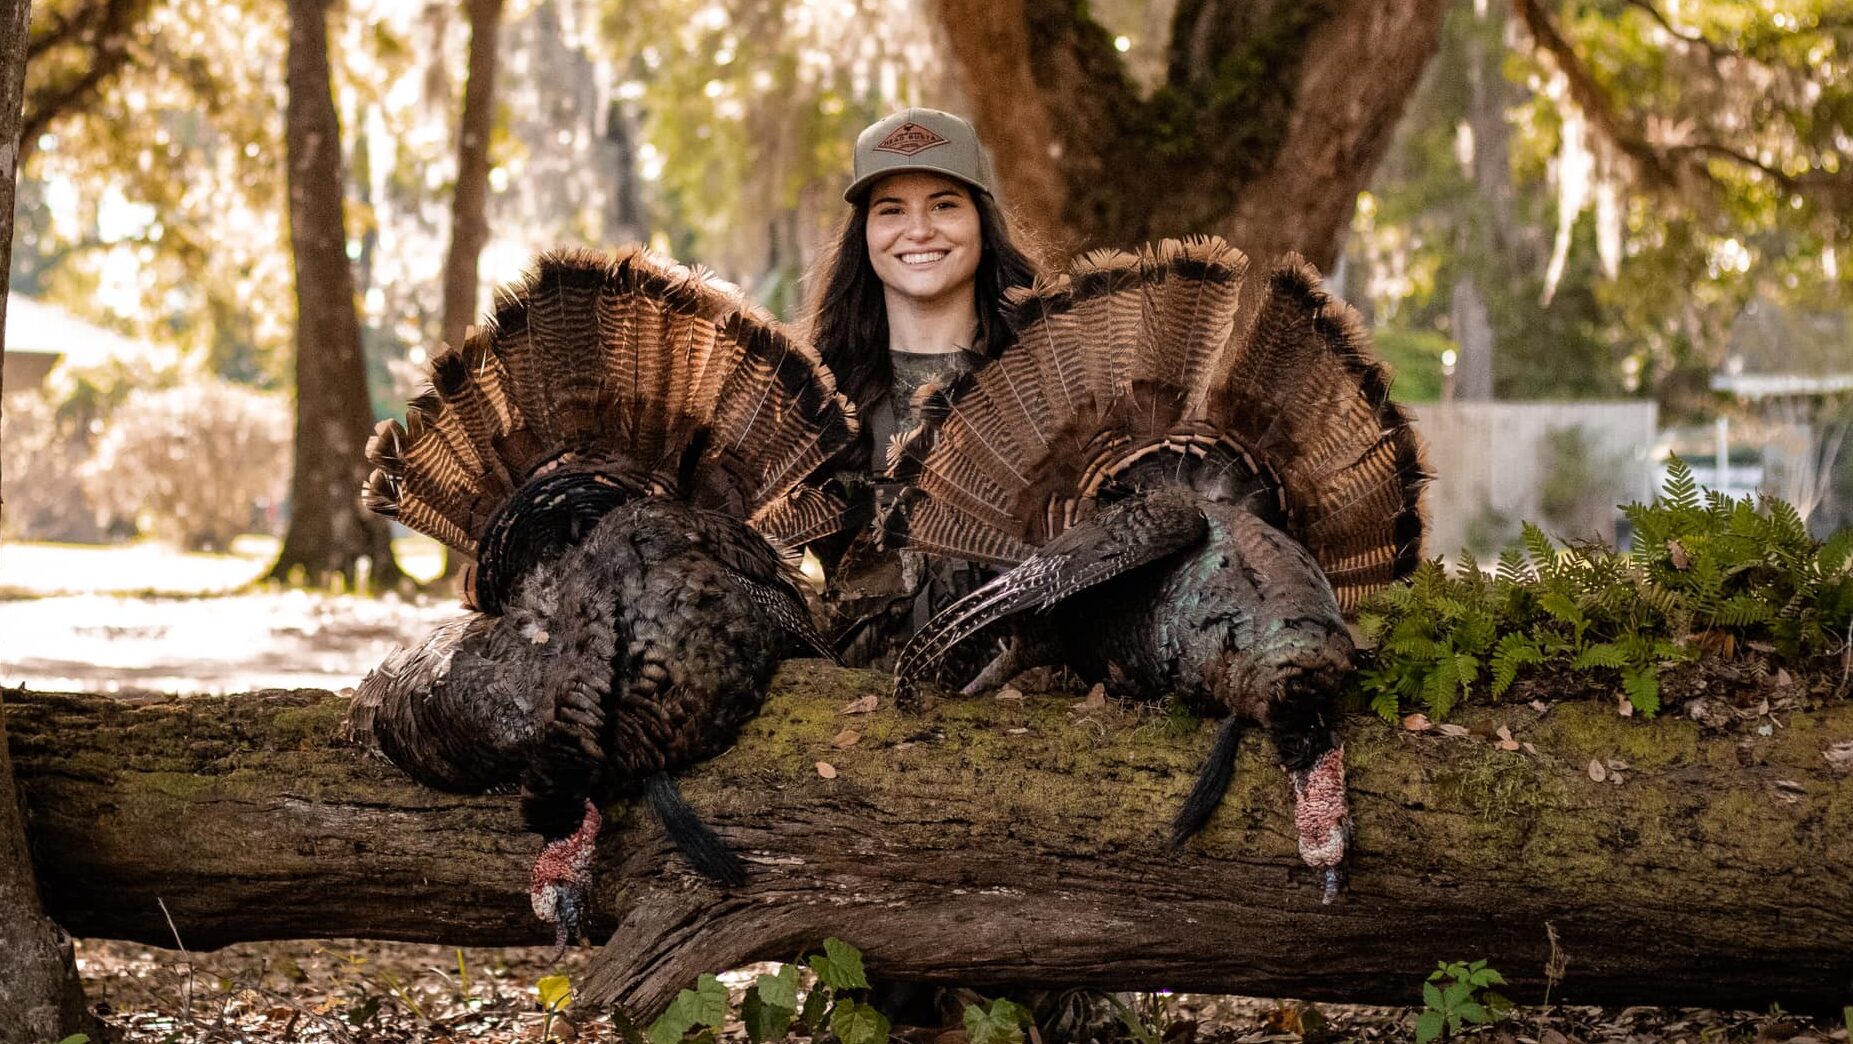 Baylee Holbrook, a hunter from Florida, died in a freak accident.